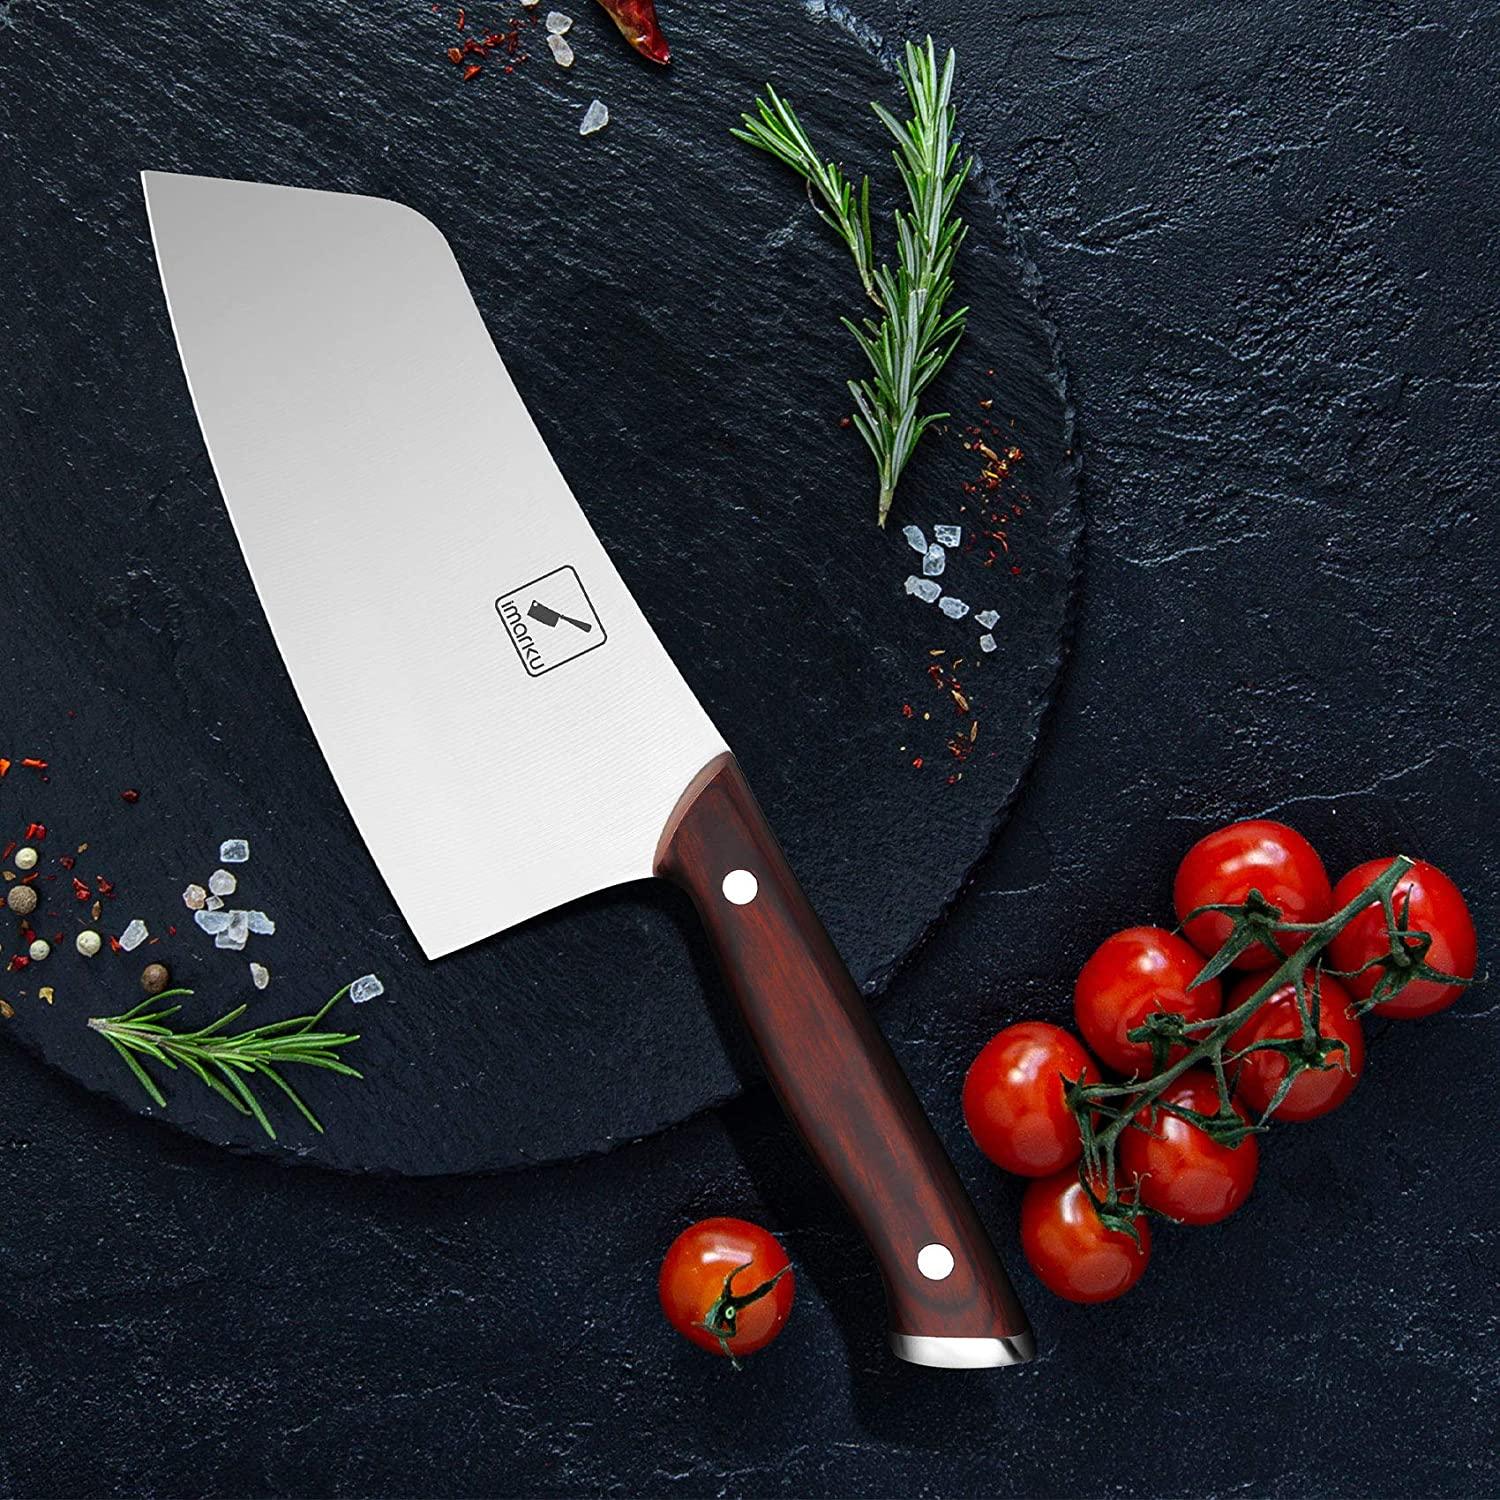 imarku on X: With a big, thick blade, the imarku 7 Meat Cleaver makes it  easy to process larger cuts of bone-in meat or break down whole poultry. # imarku #knife #kitchen  /